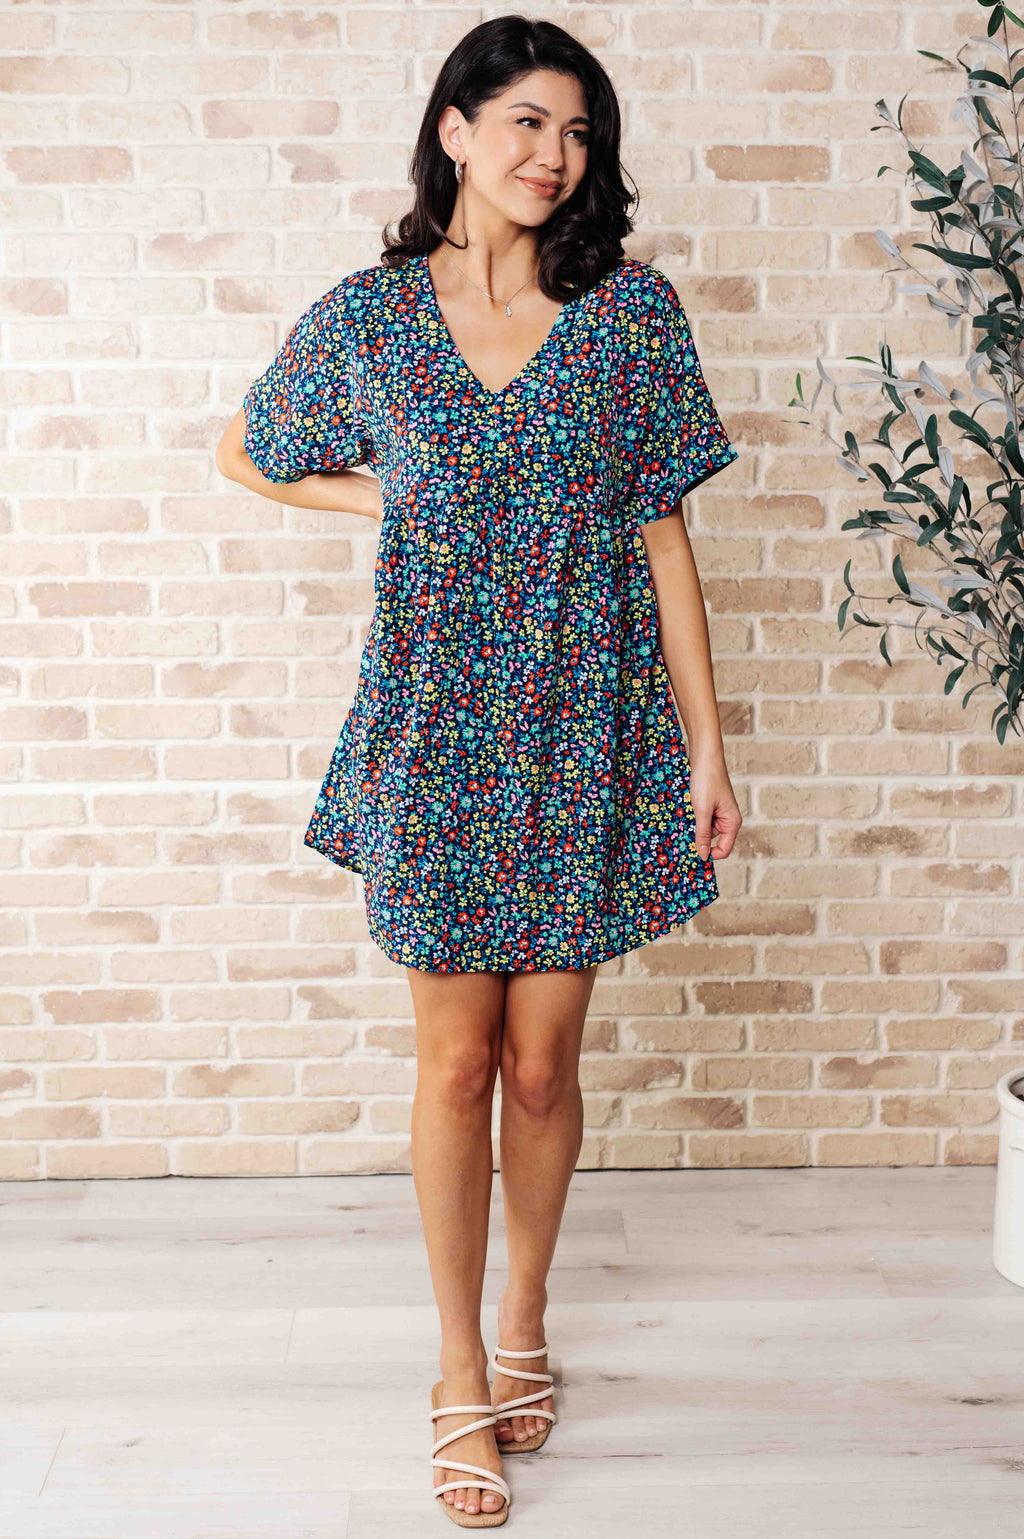 Hazel Blues® |  What's the Hurry About? Floral Dress